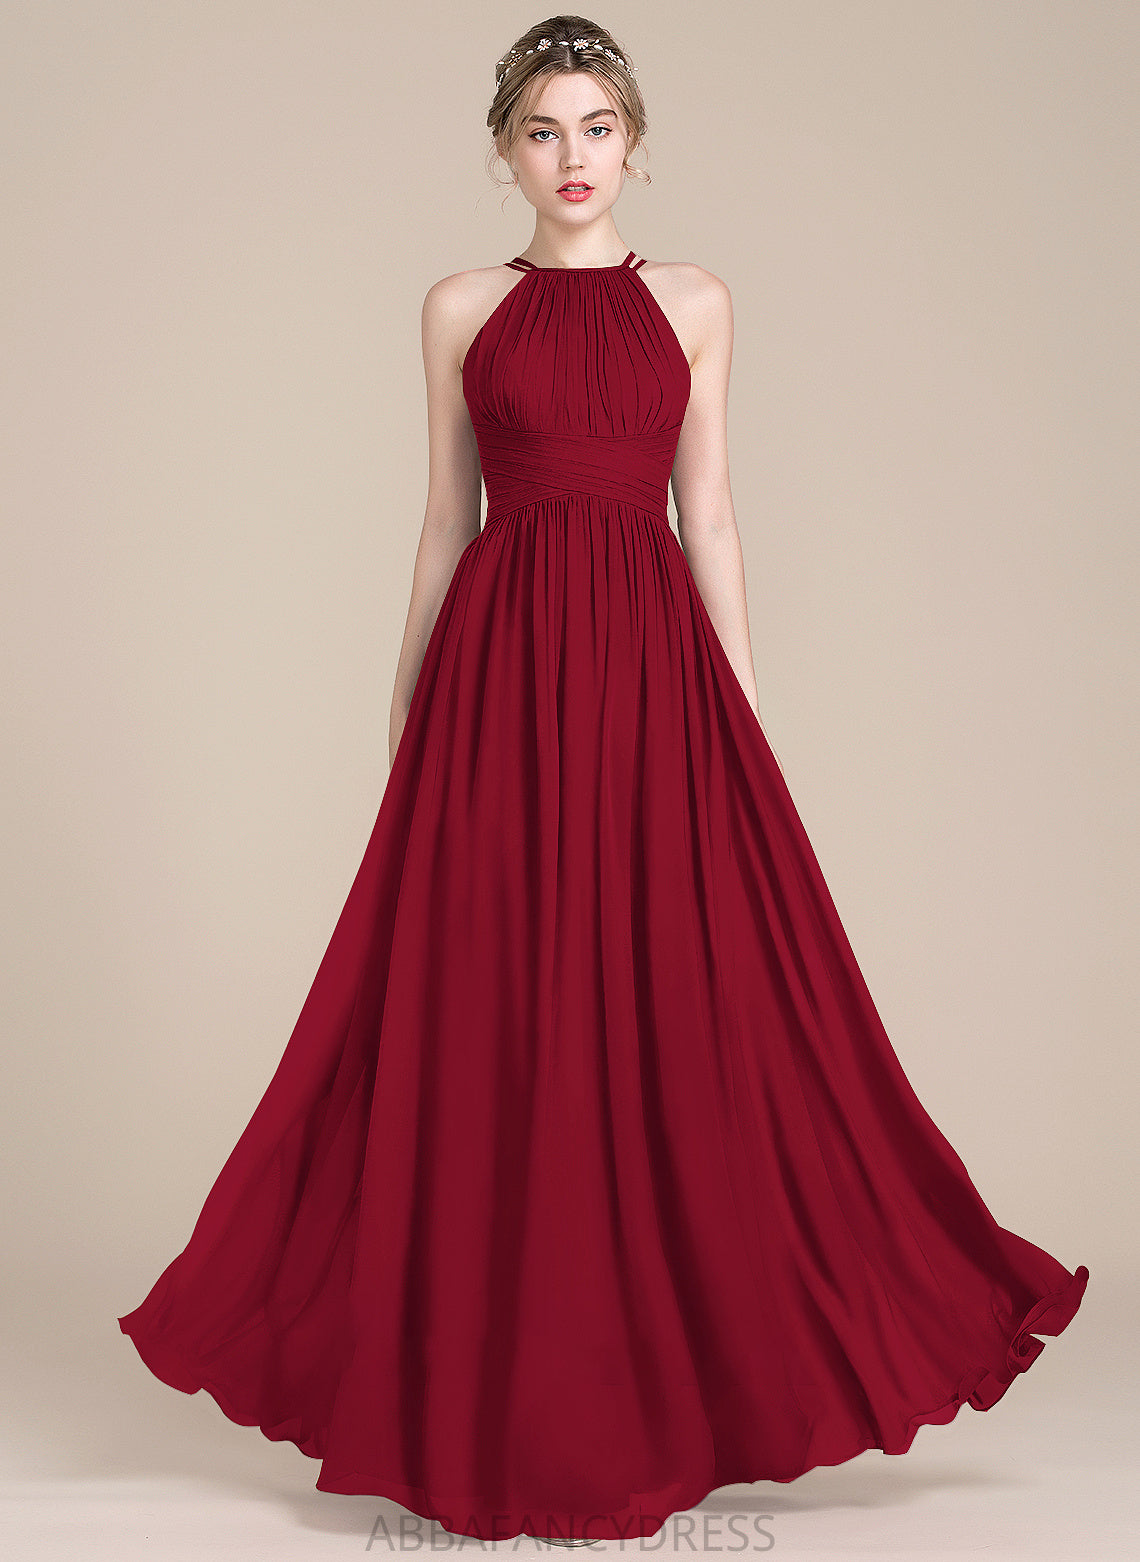 With Floor-Length A-Line Neck Alivia Scoop Prom Dresses Chiffon Ruffle